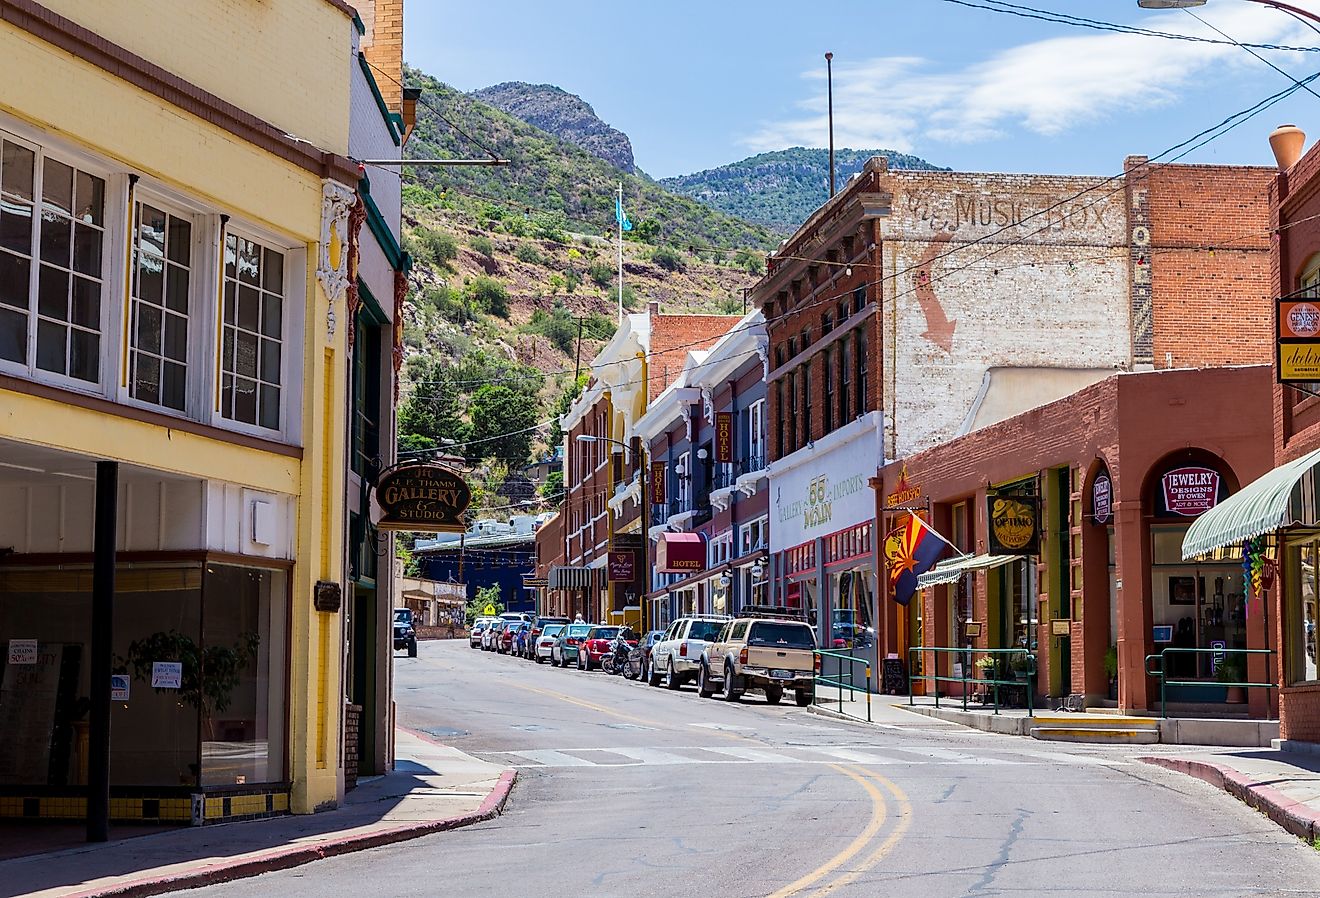 Main St store fronts in downtown Bisbee, Arizona in the summer. Image credit D.J. Wednesday via Shutterstock